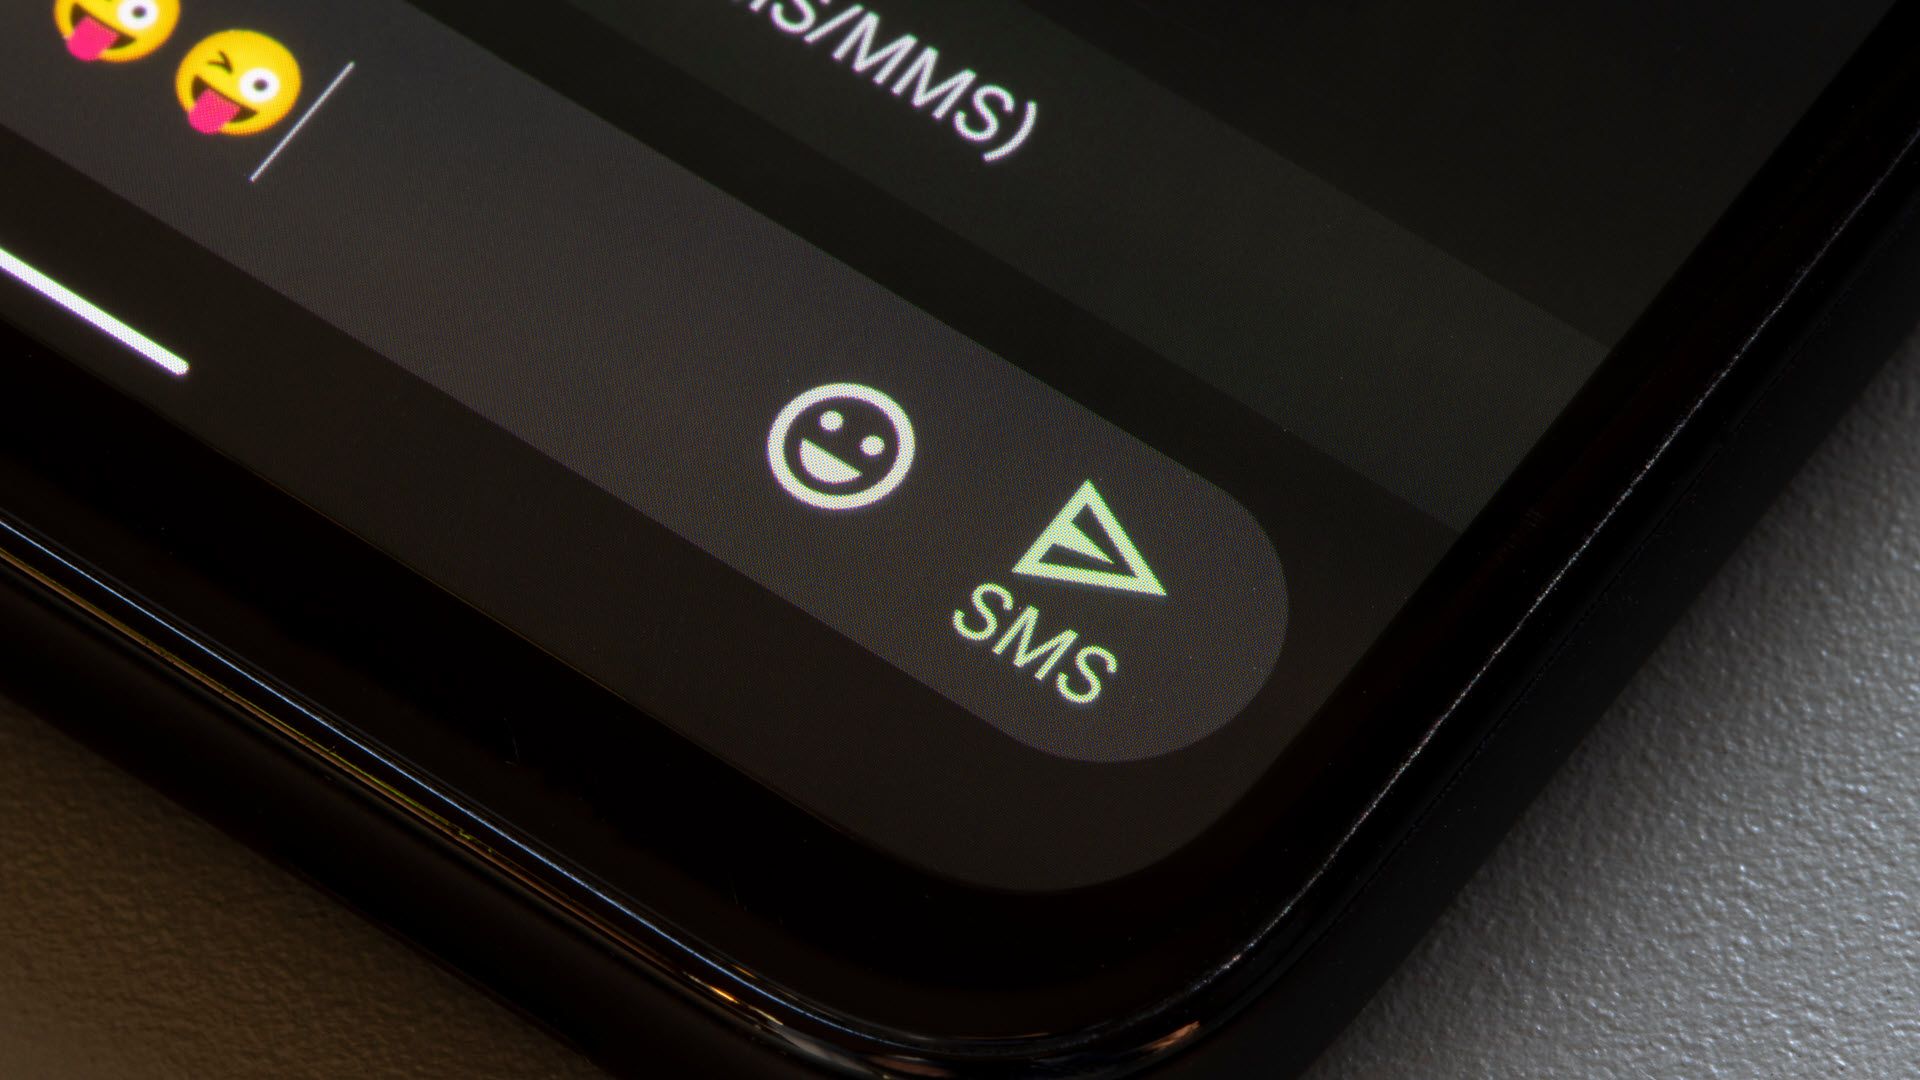 A messaging app showing an SMS symbol